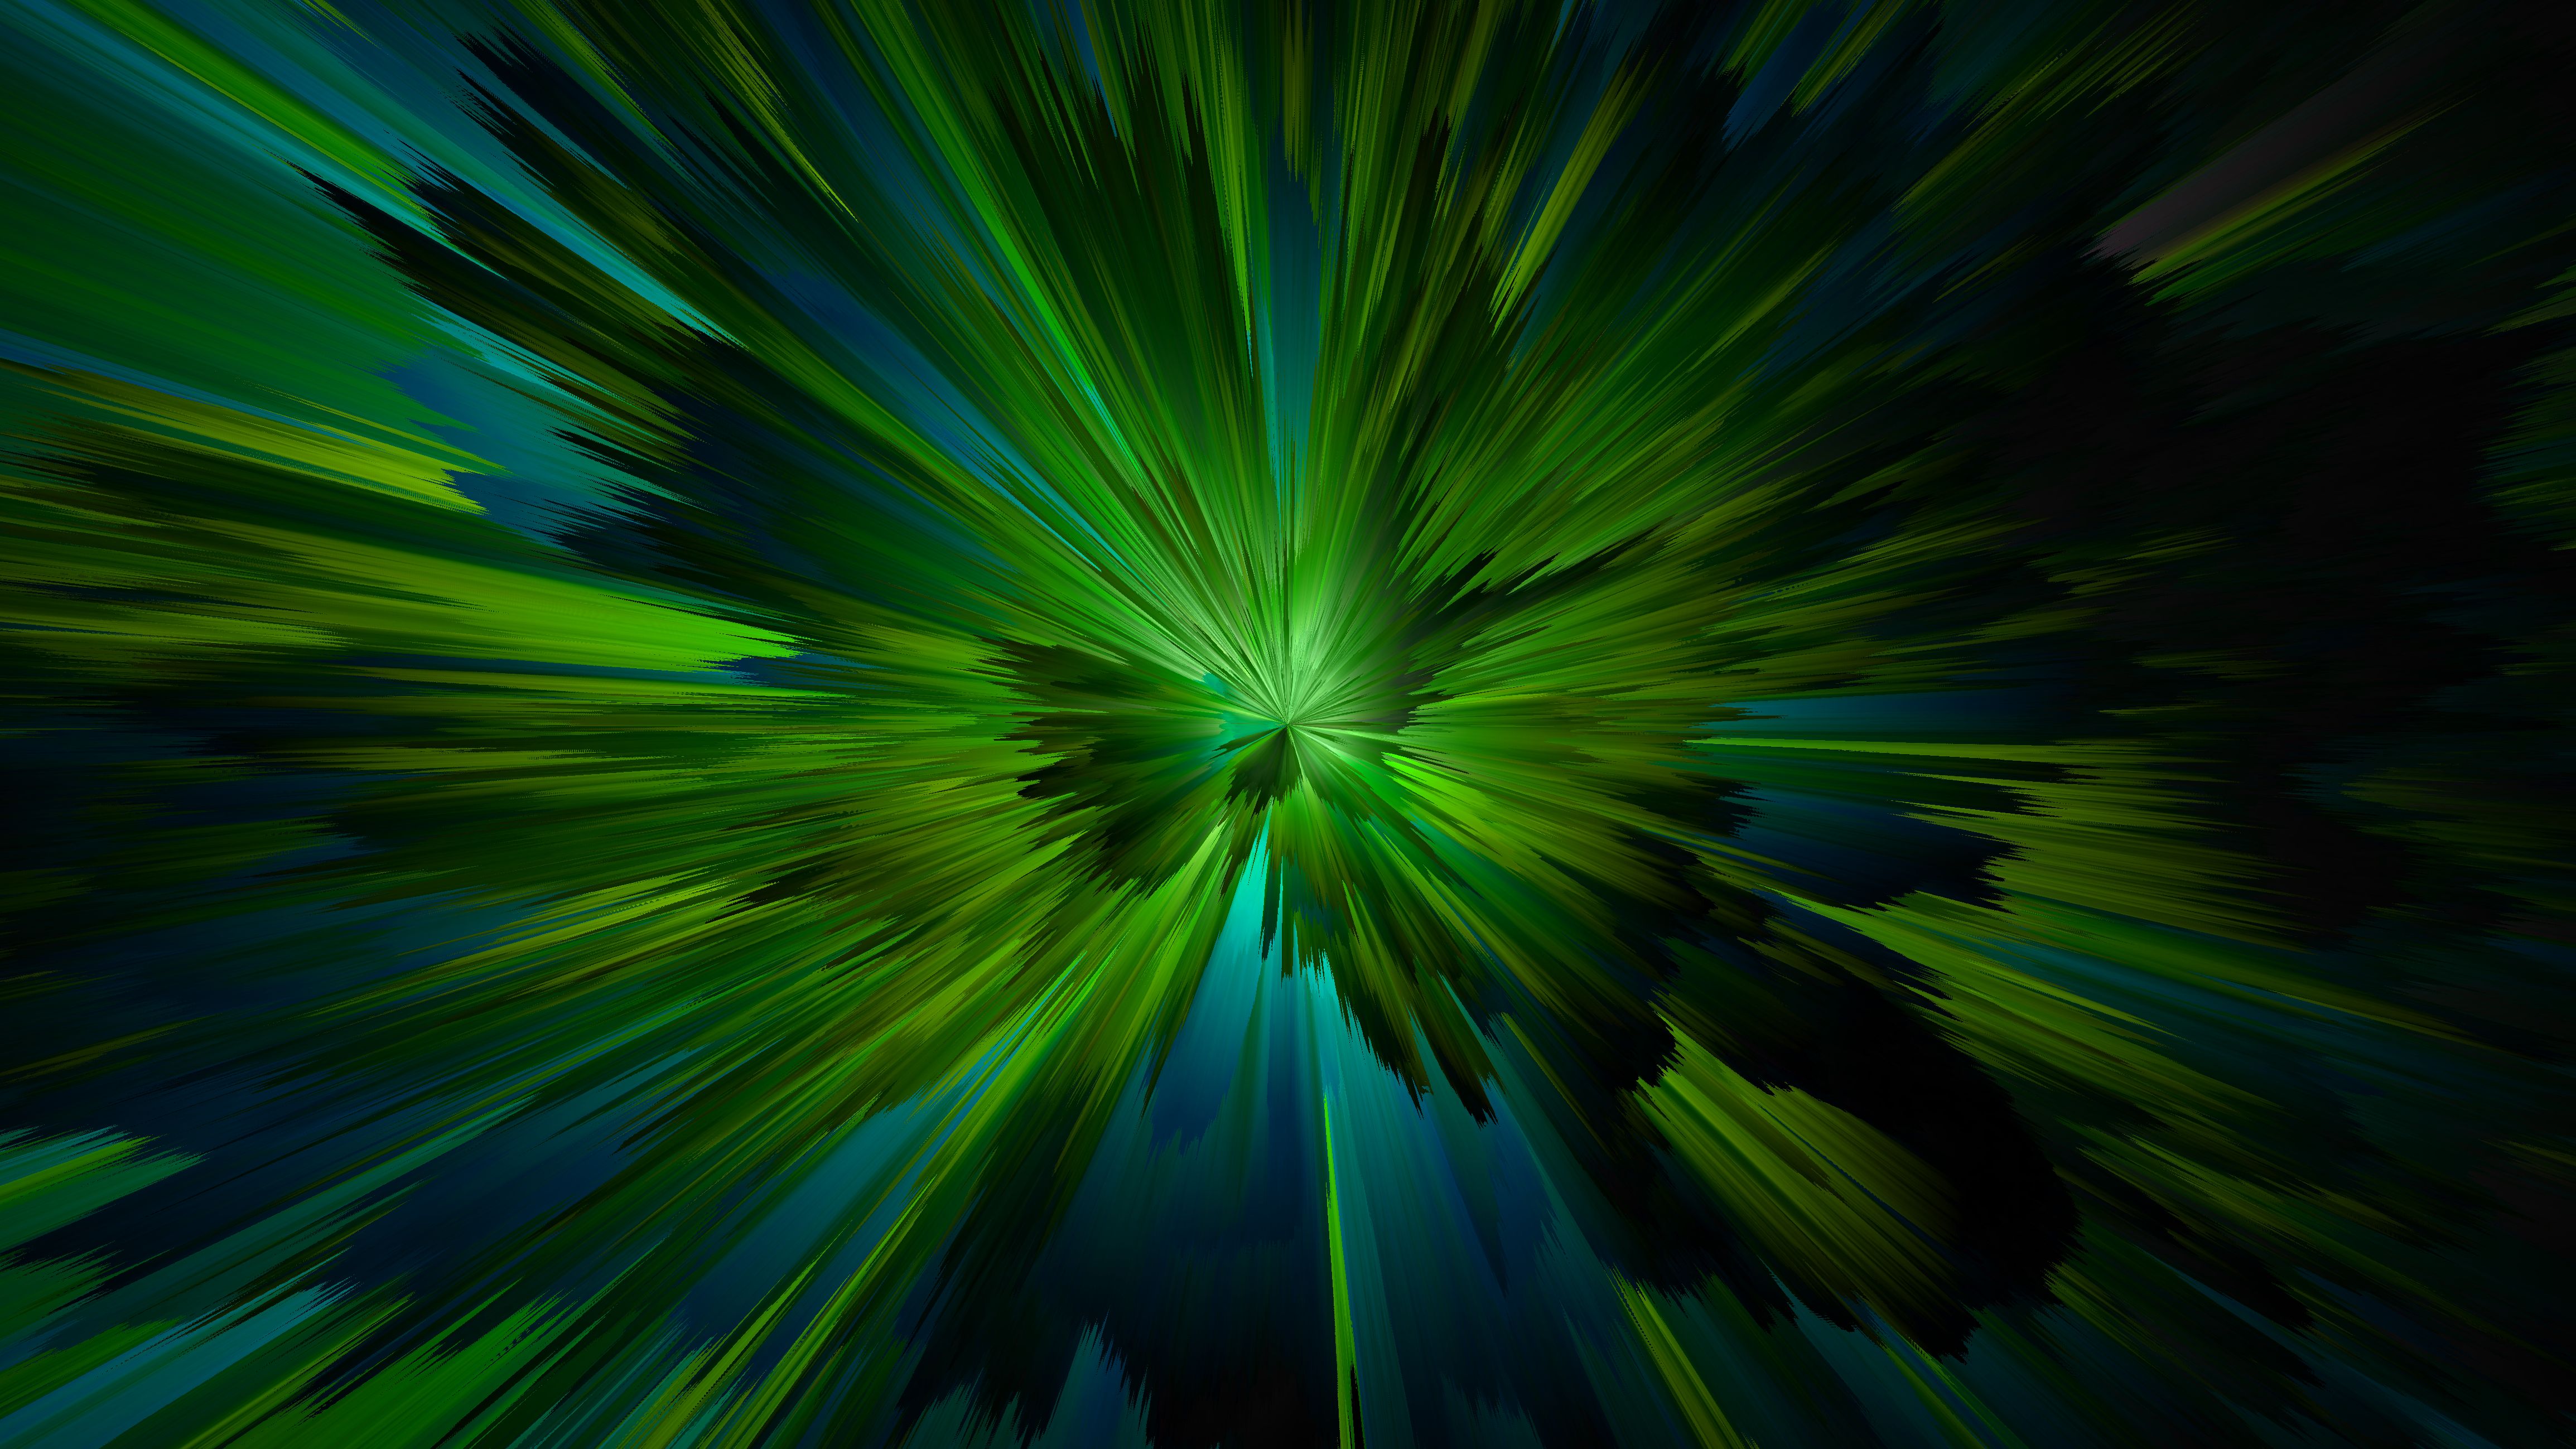 beams, streaks, abstract, green, rays, lines, stripes Full HD